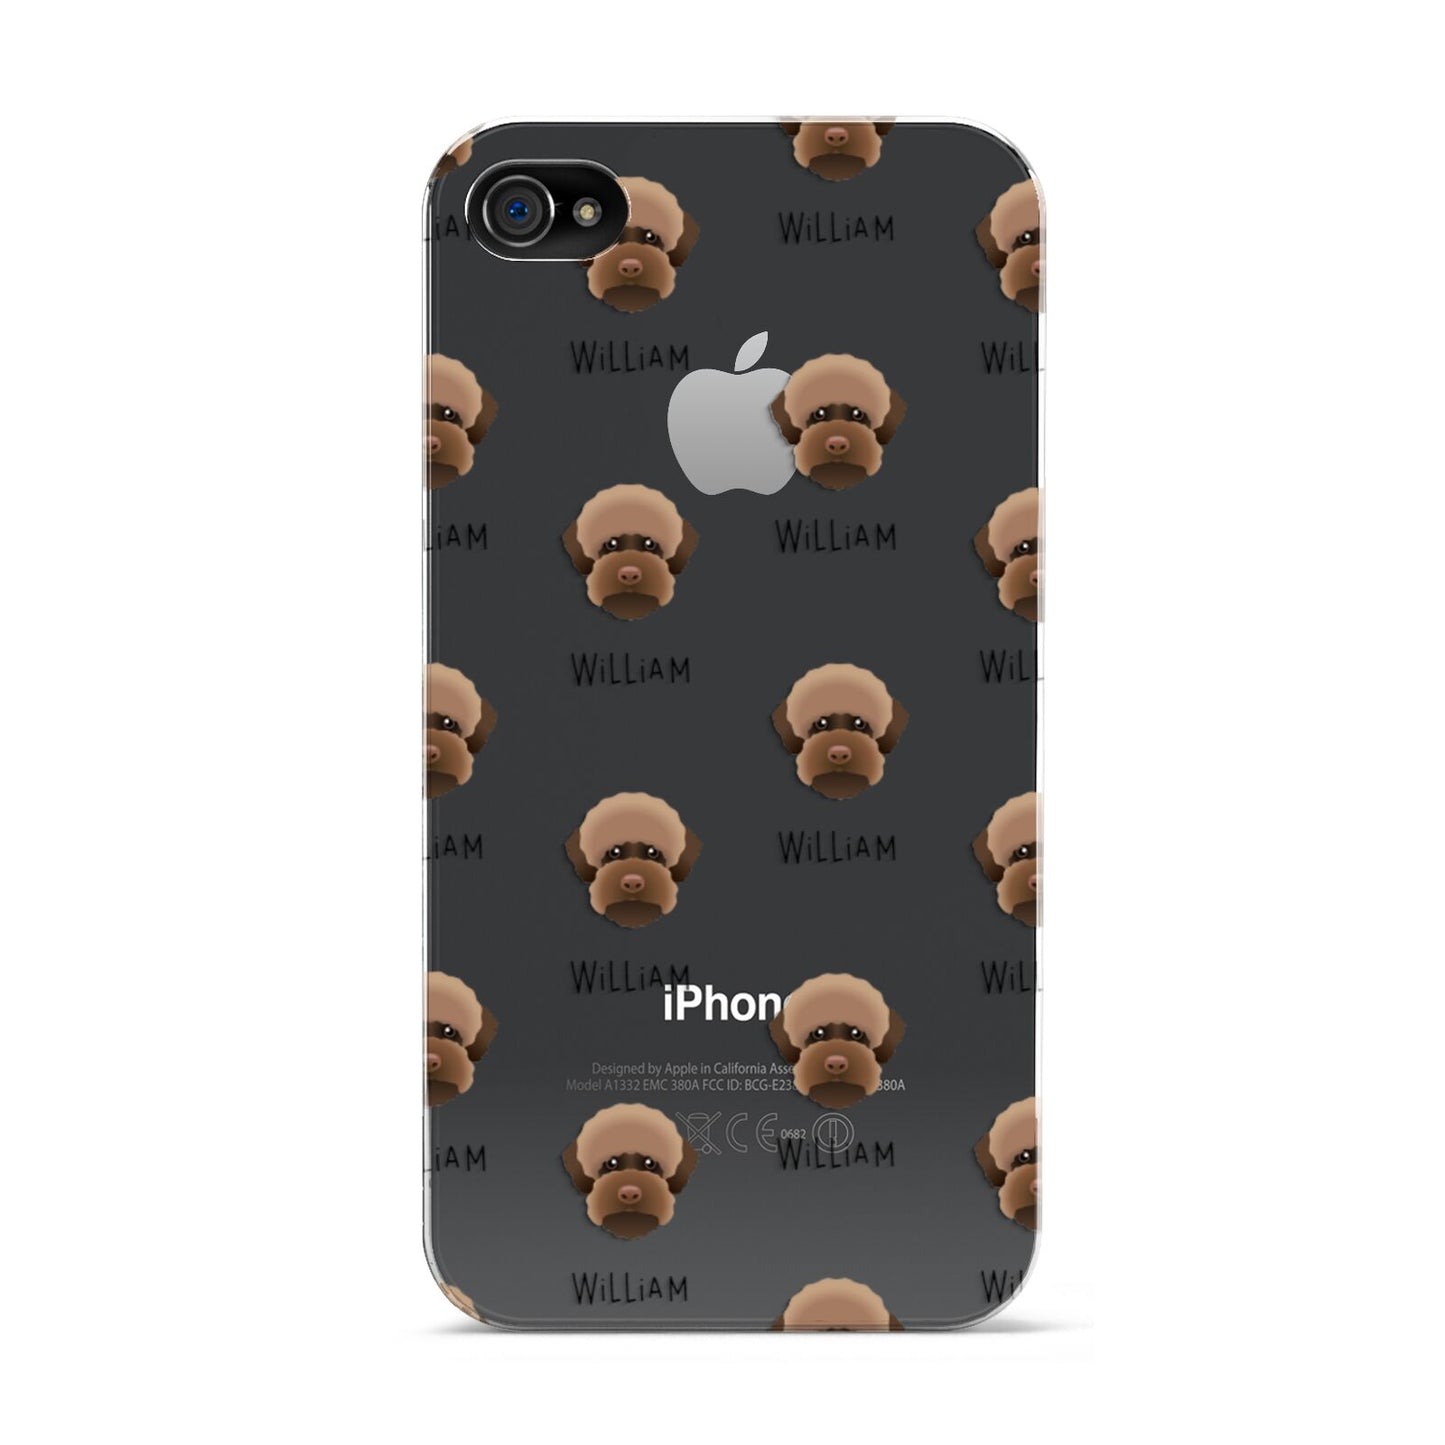 Lagotto Romagnolo Icon with Name Apple iPhone 4s Case